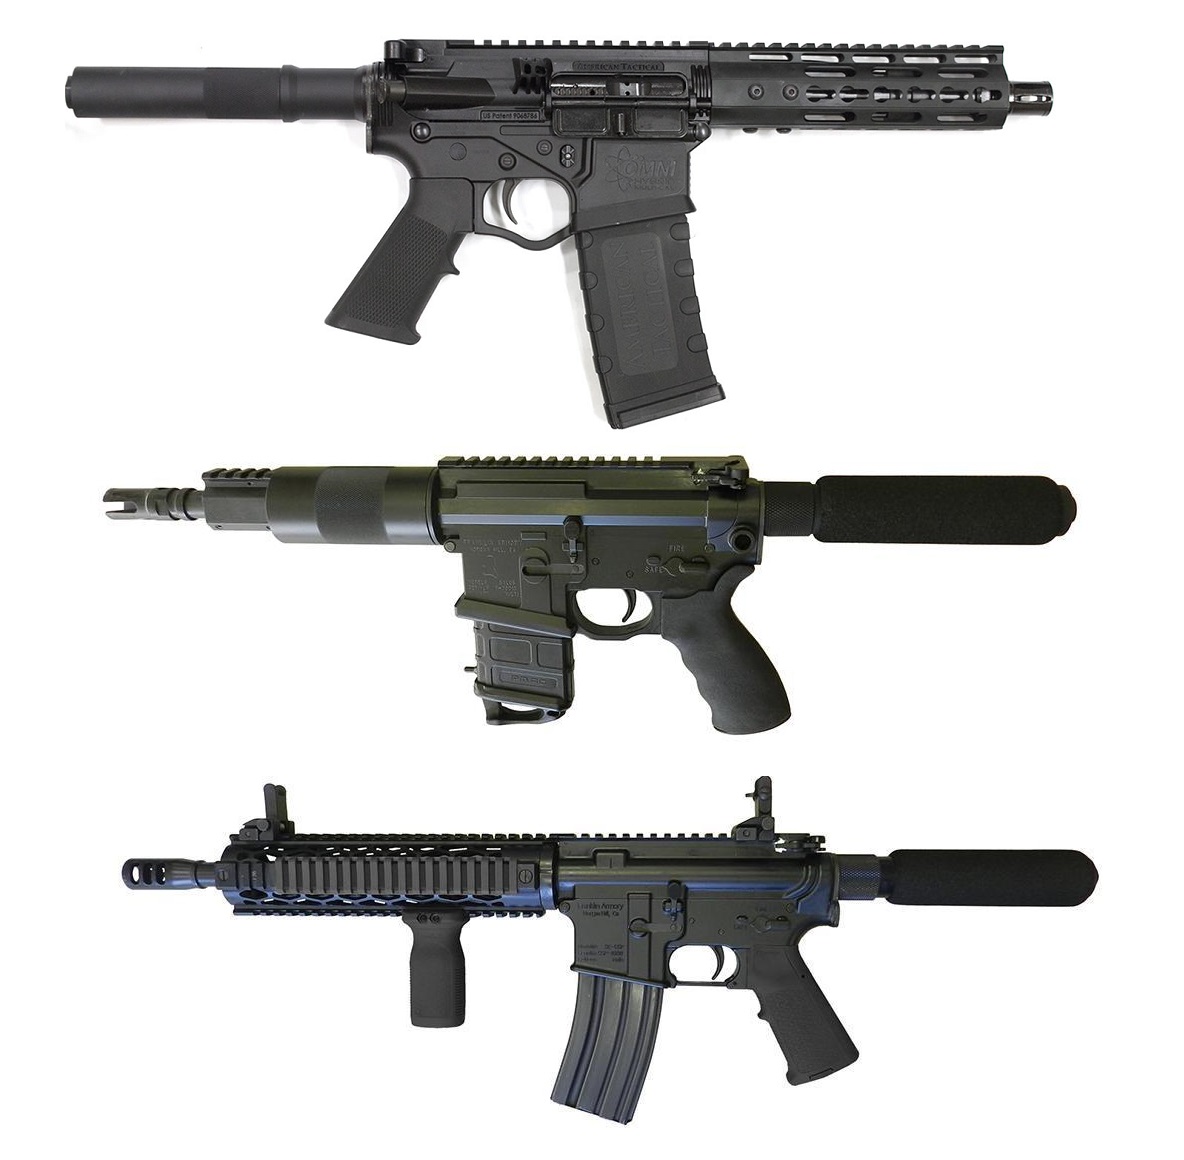  AR-15 Pistols for Sale from $375.94 @ wikiarms.com